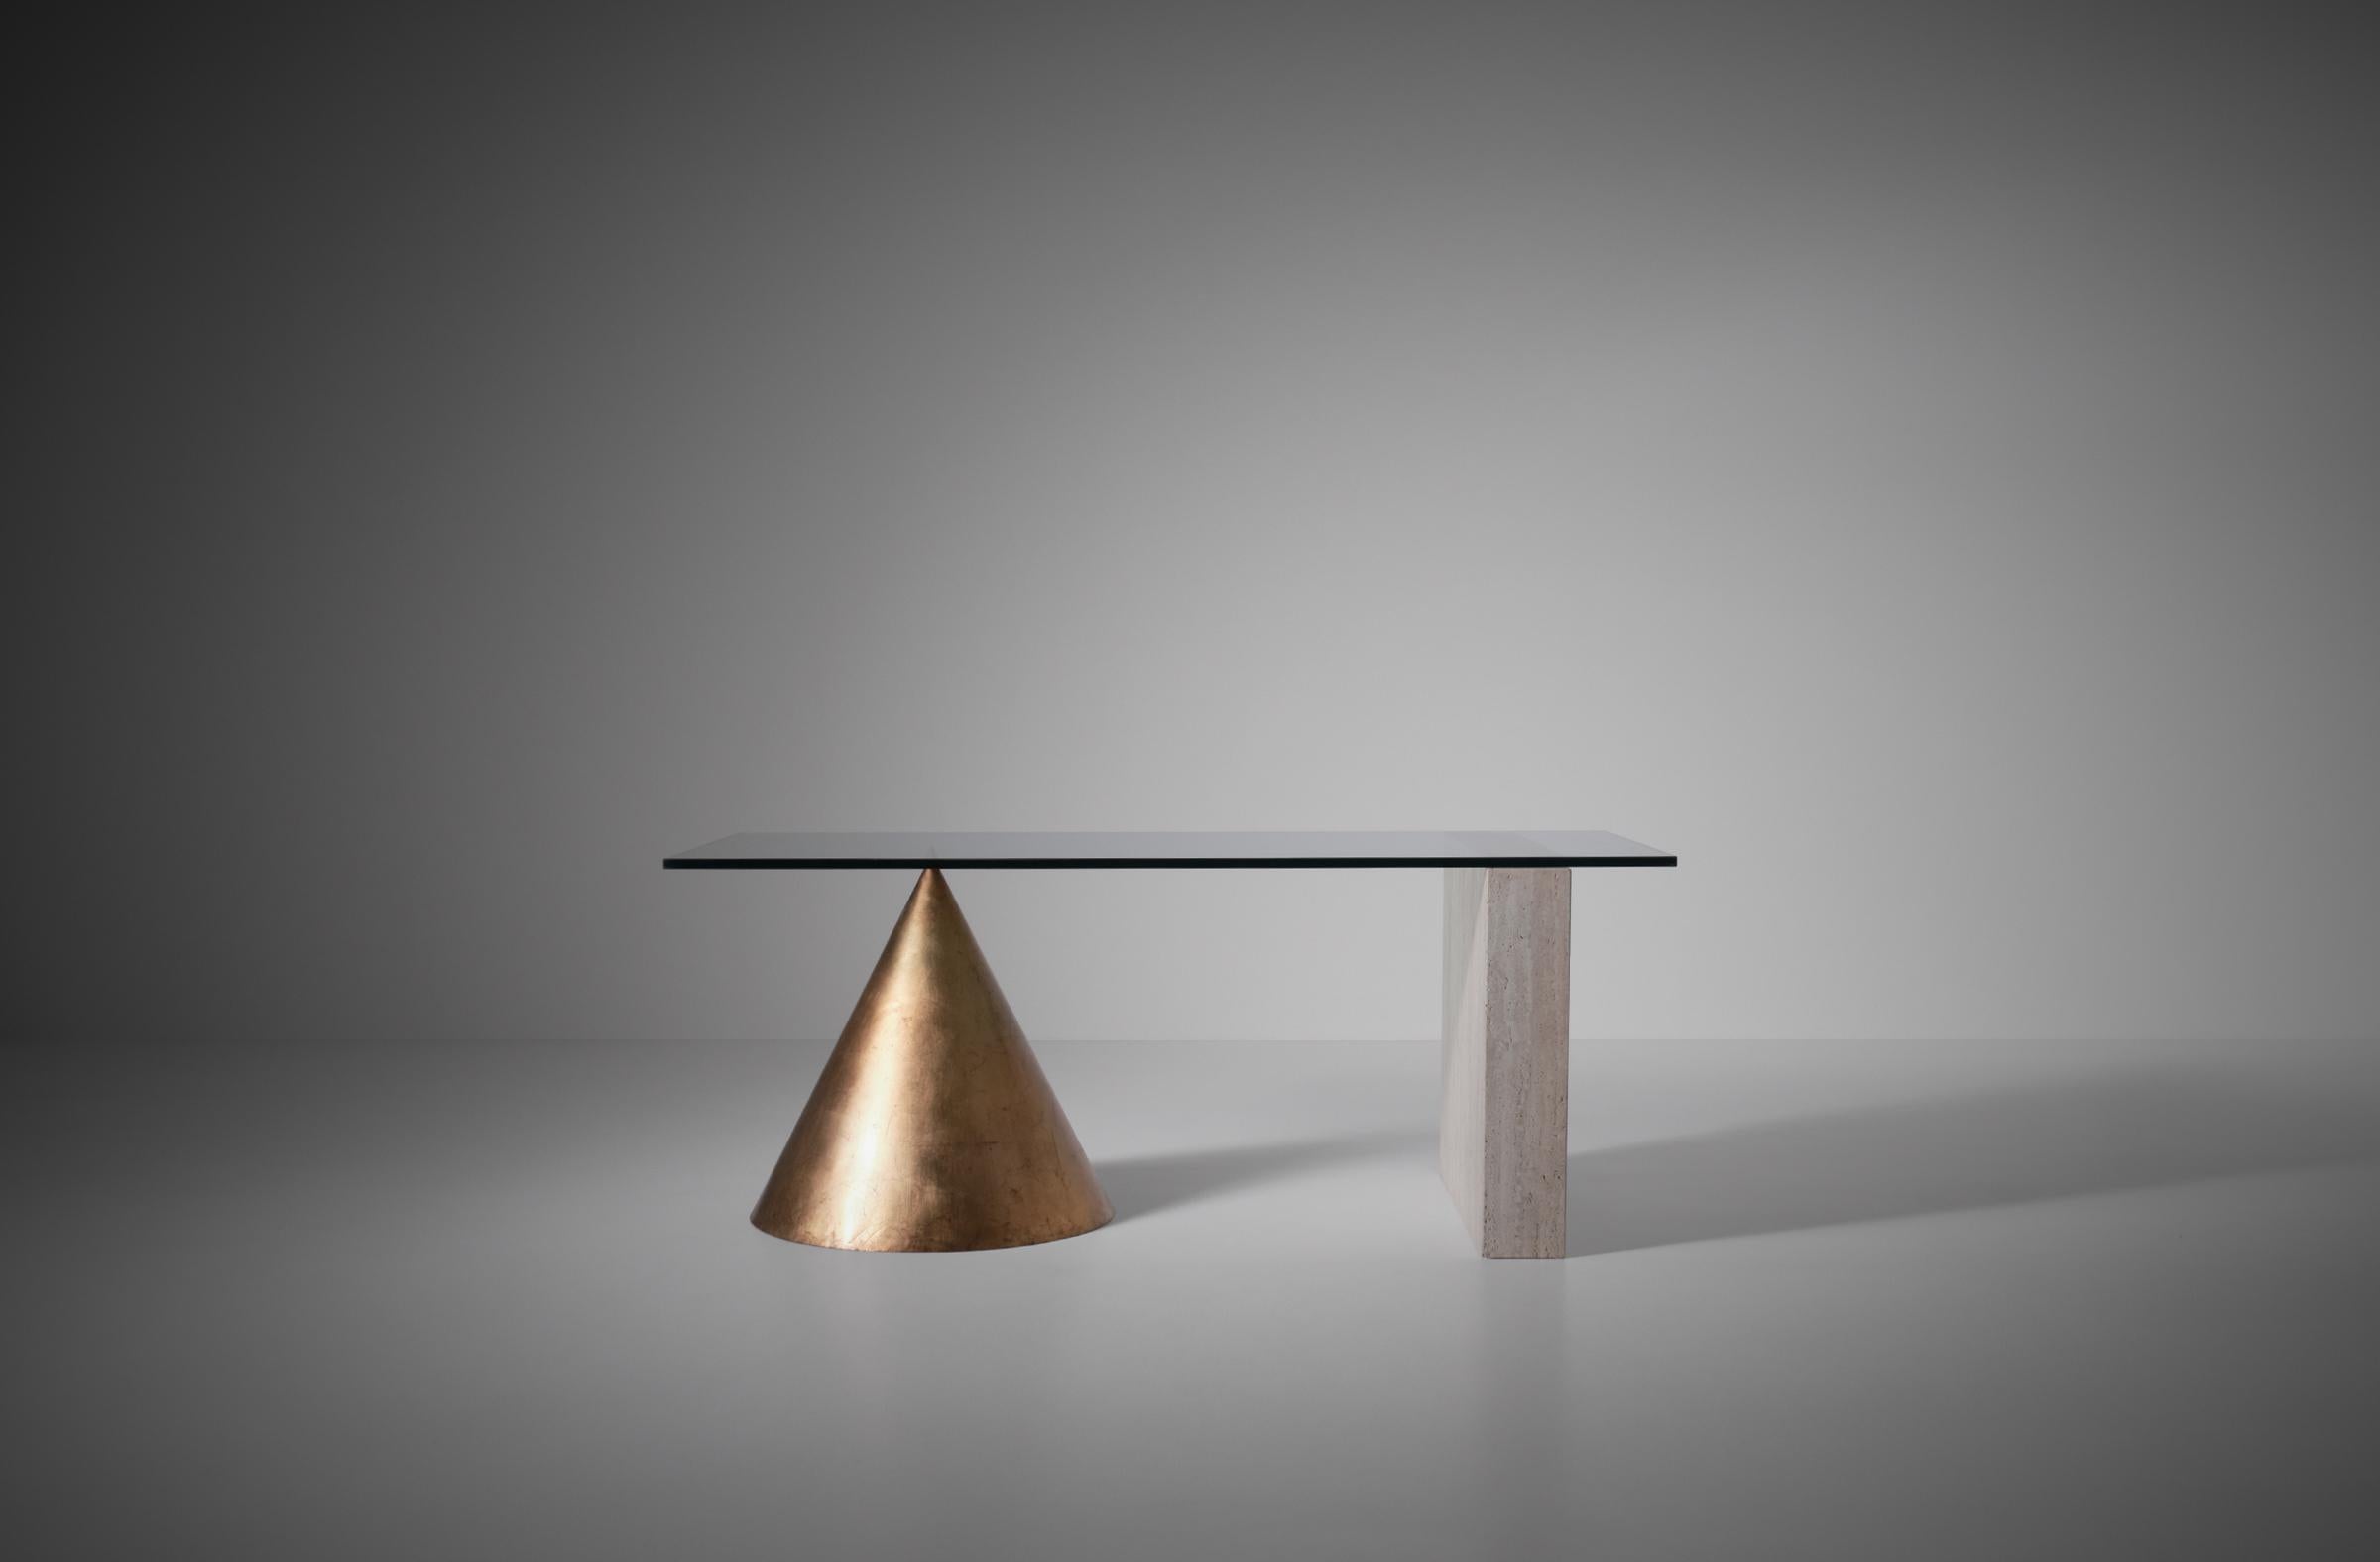 Iconical ‘Kono’ dining table by Lella & Massimo Vignelli for Casigliani, Italy 1984.
This rare version in guilded copper is stunning as a dining table and can be very nice as a center piece or sculptural desk as well. The Kono table has a glass top